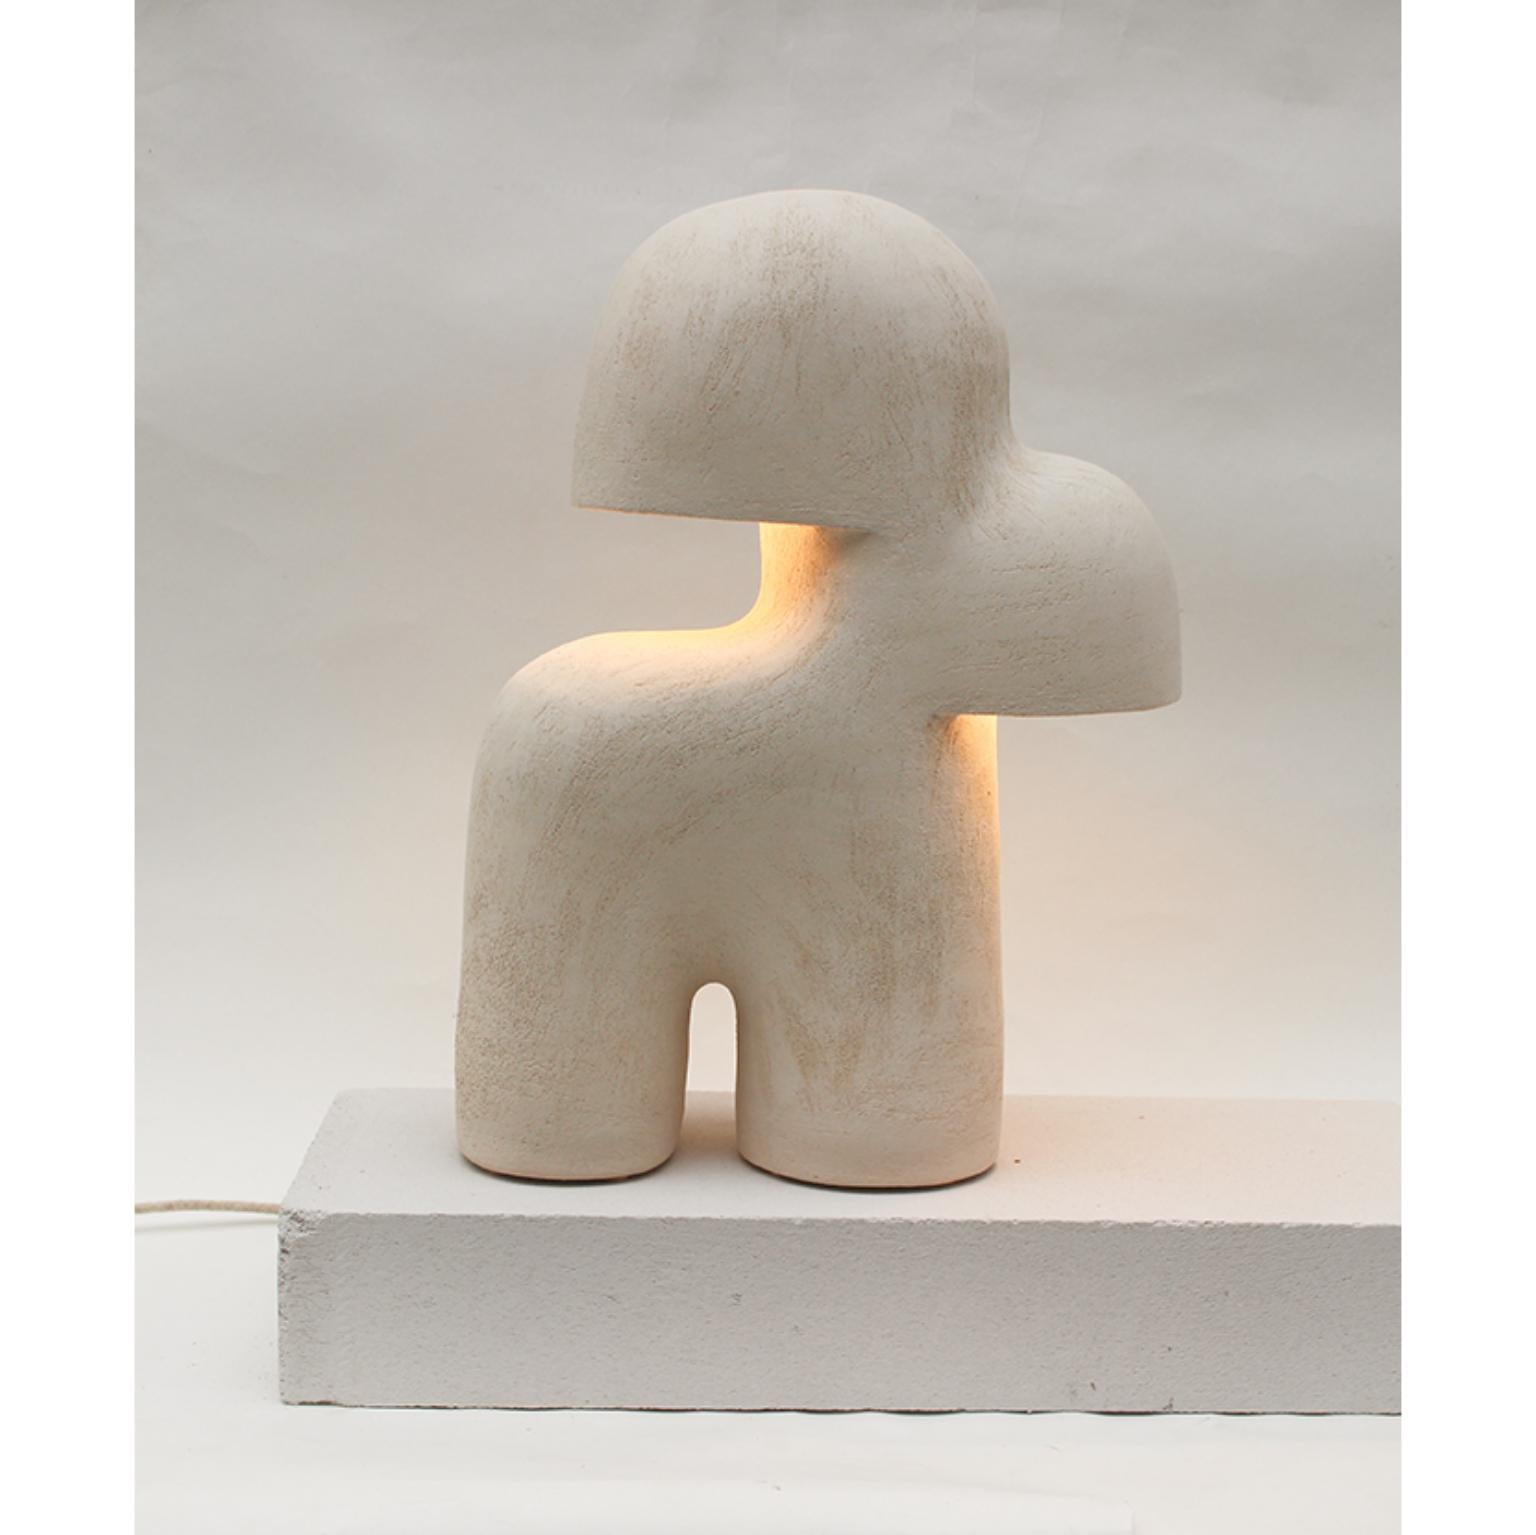 Edifice #50 Stoneware Lamp by Elisa Uberti
Dimensions: W 16 x L 36 x H 50 cm
Materials: White Stoneware.
This product is handmade, dimensions may vary.

All our lamps can be wired according to each country. If sold to the USA it will be wired for